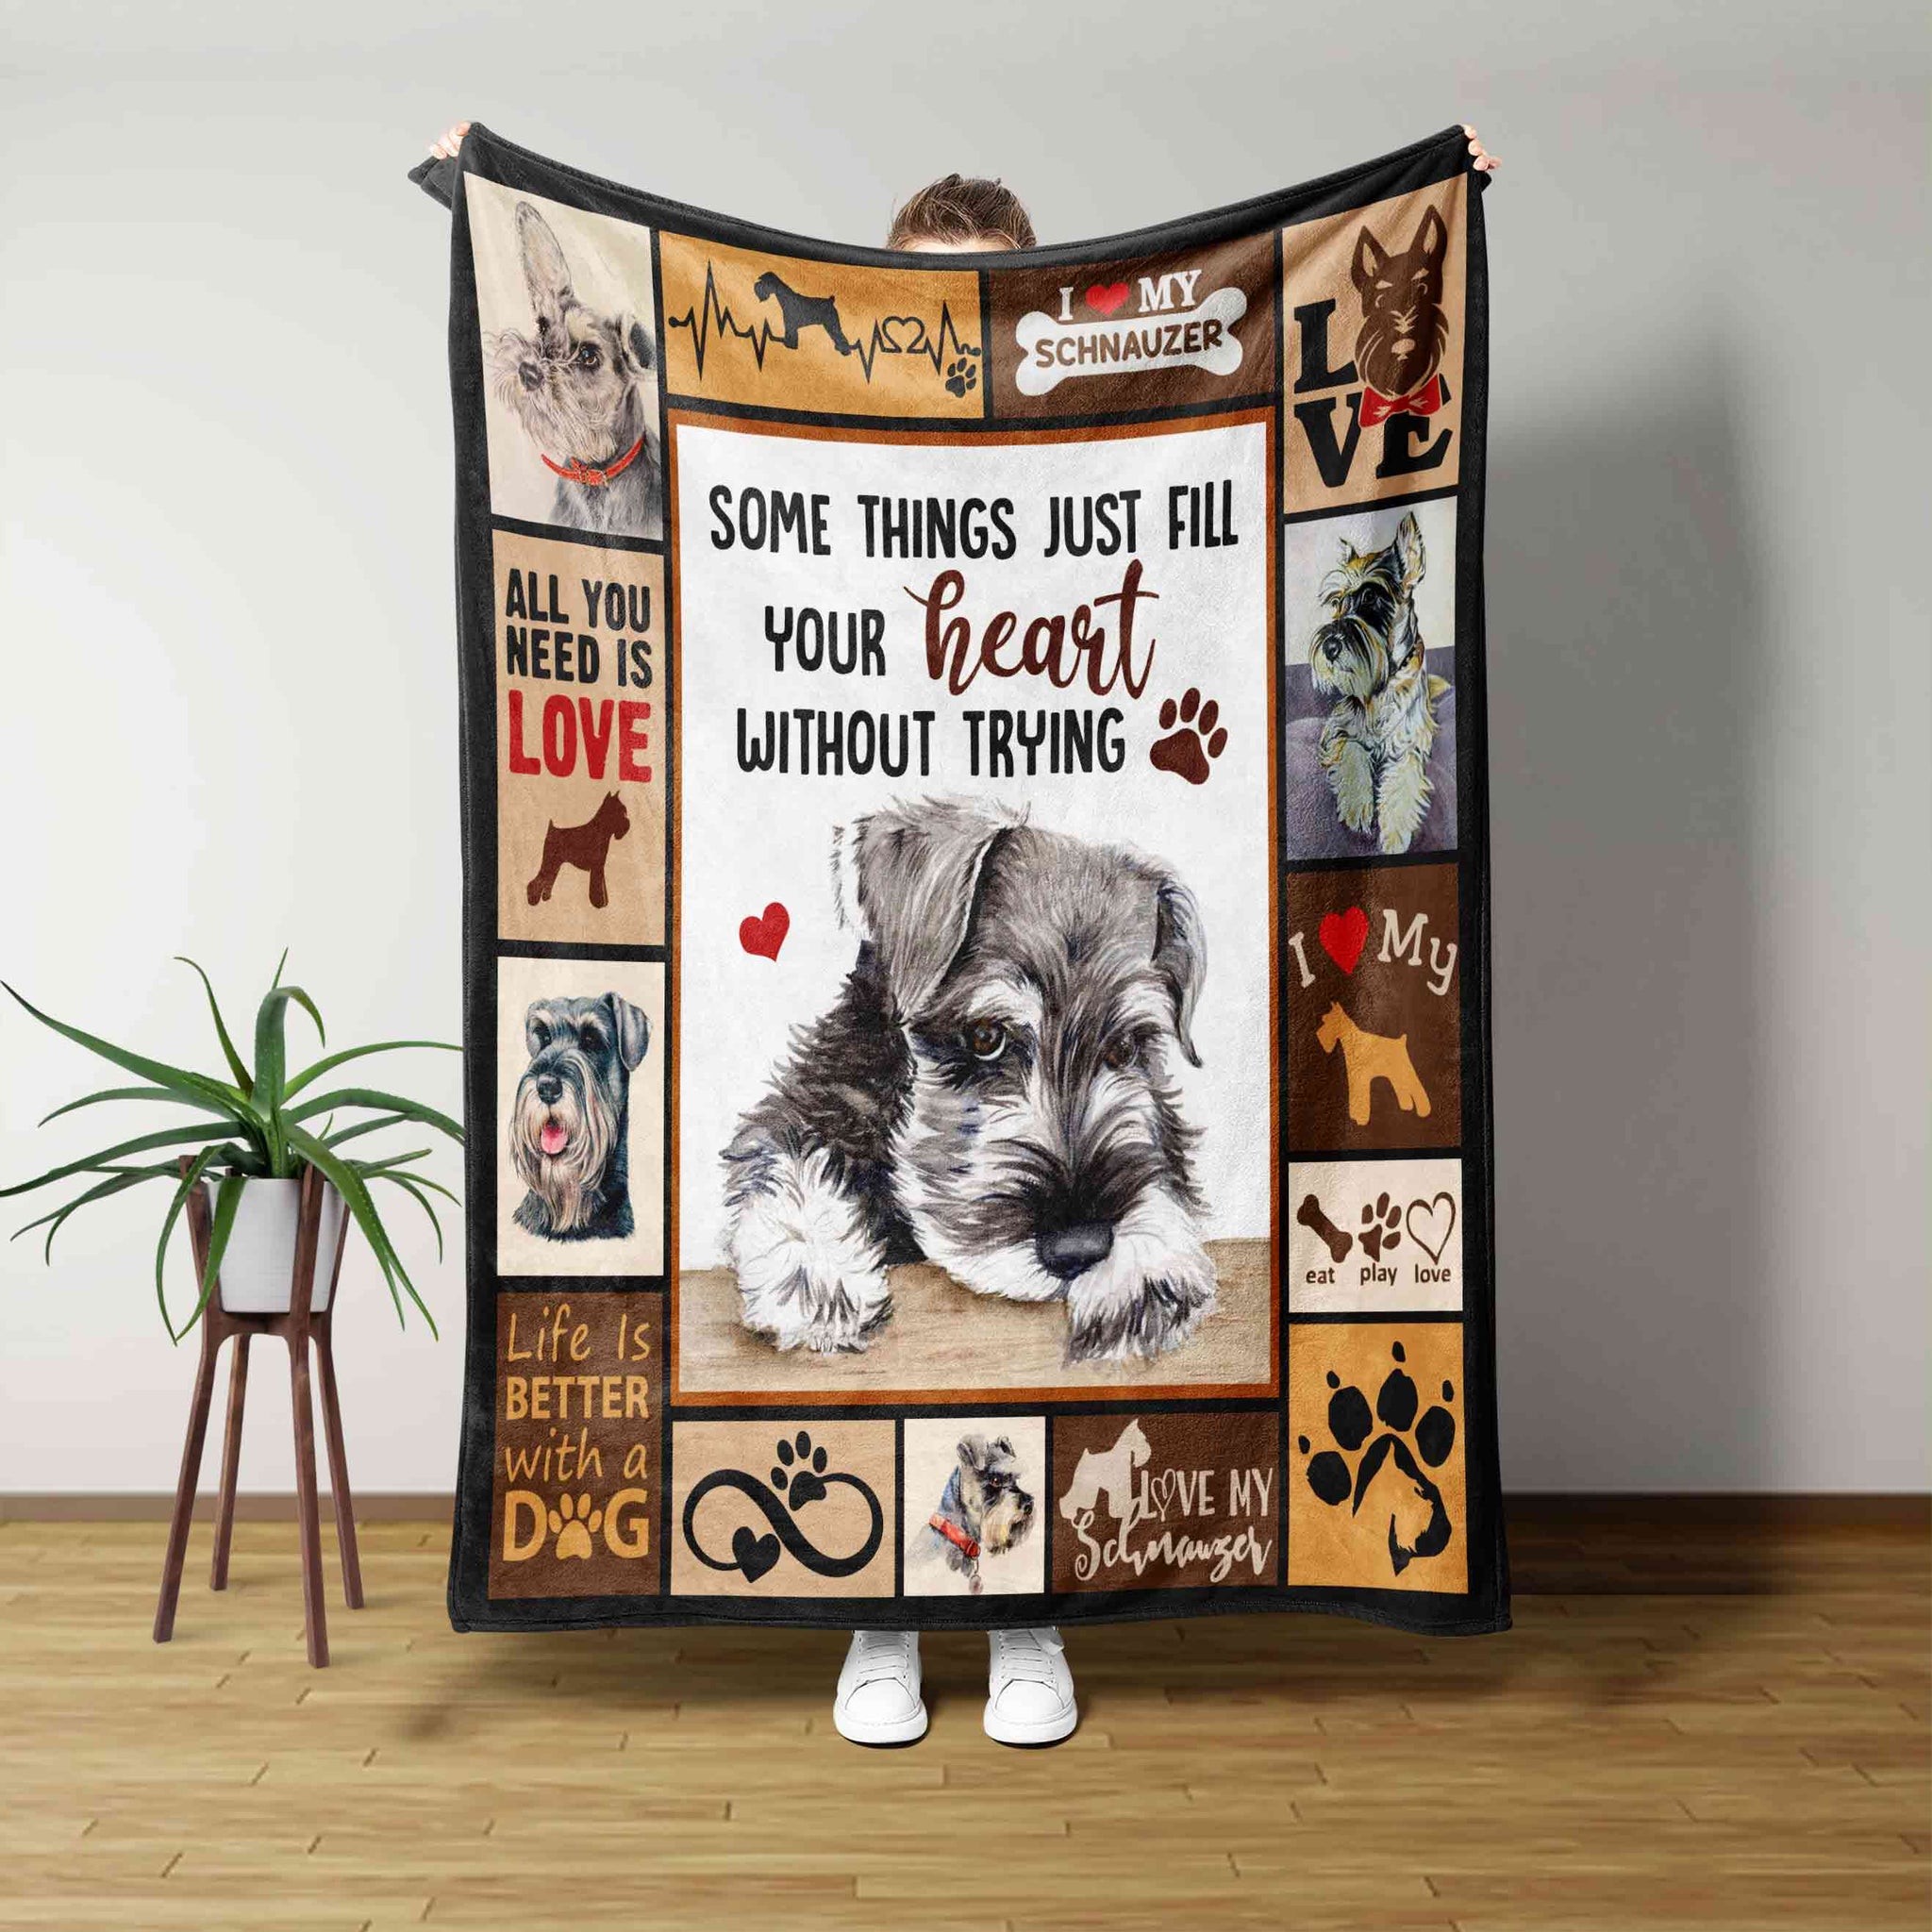 Life Is Better With A Dog Blanket, Schnauzer Blanket, Pet Blanket, Family Blanket, Gift Blanket